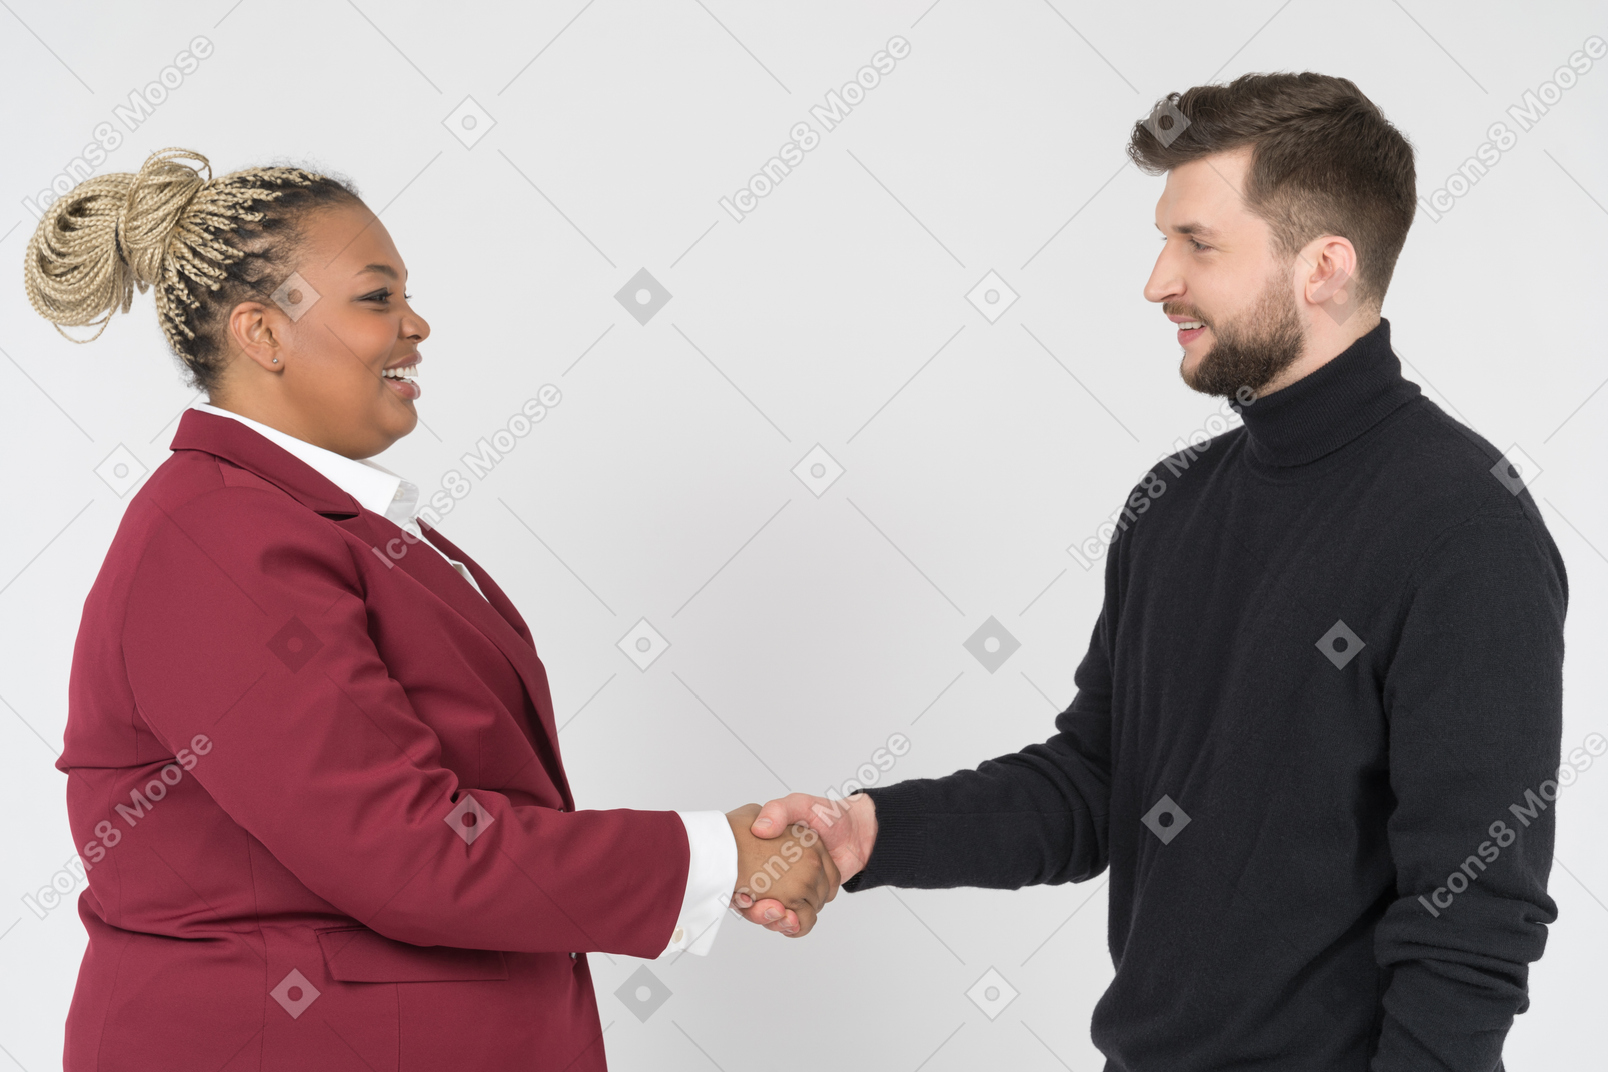 Manager greeting a new employee